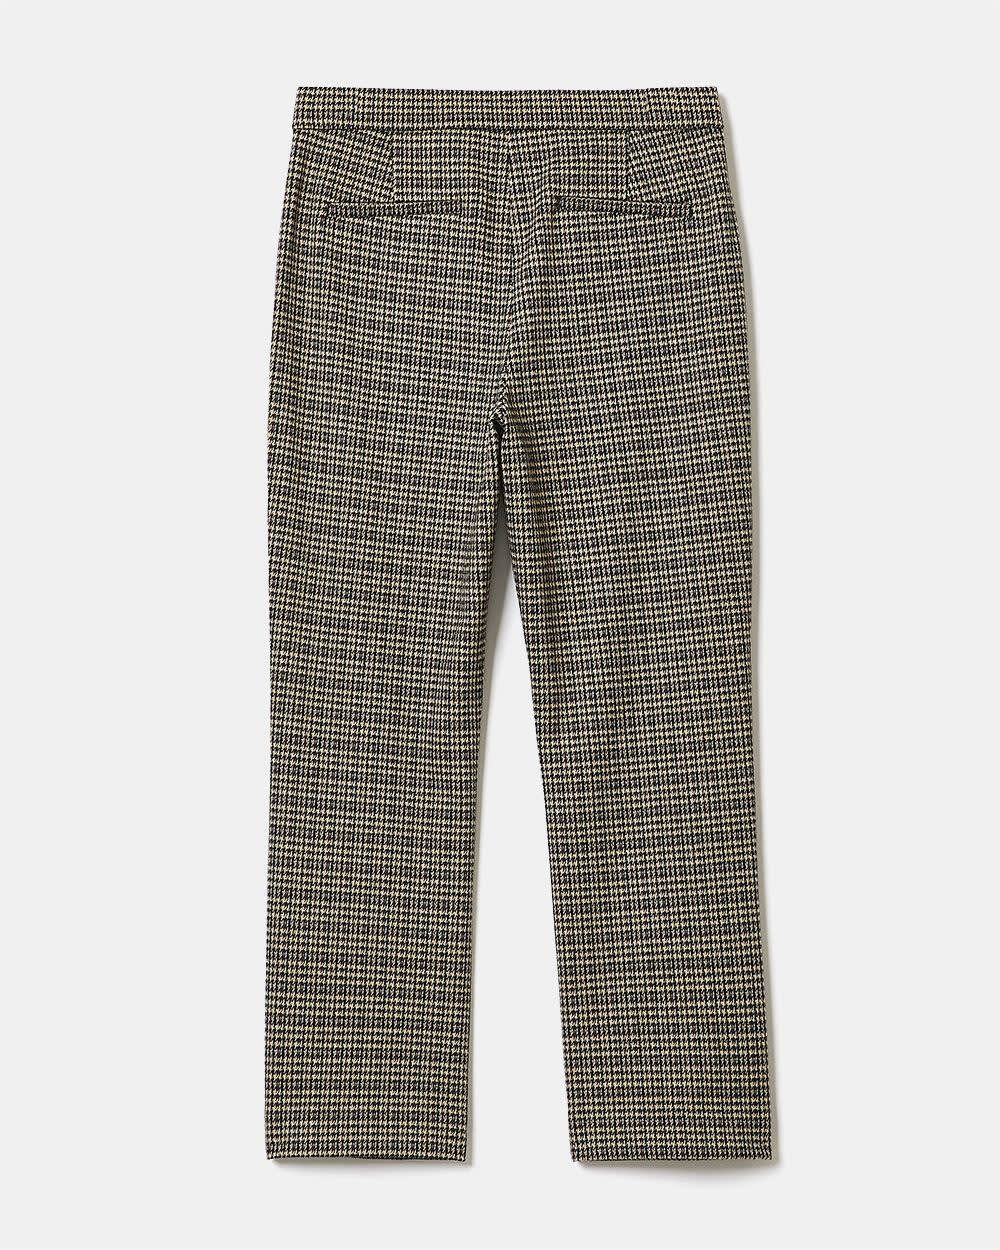 Knit Houndstooth Straight Ankle Pant - 27 